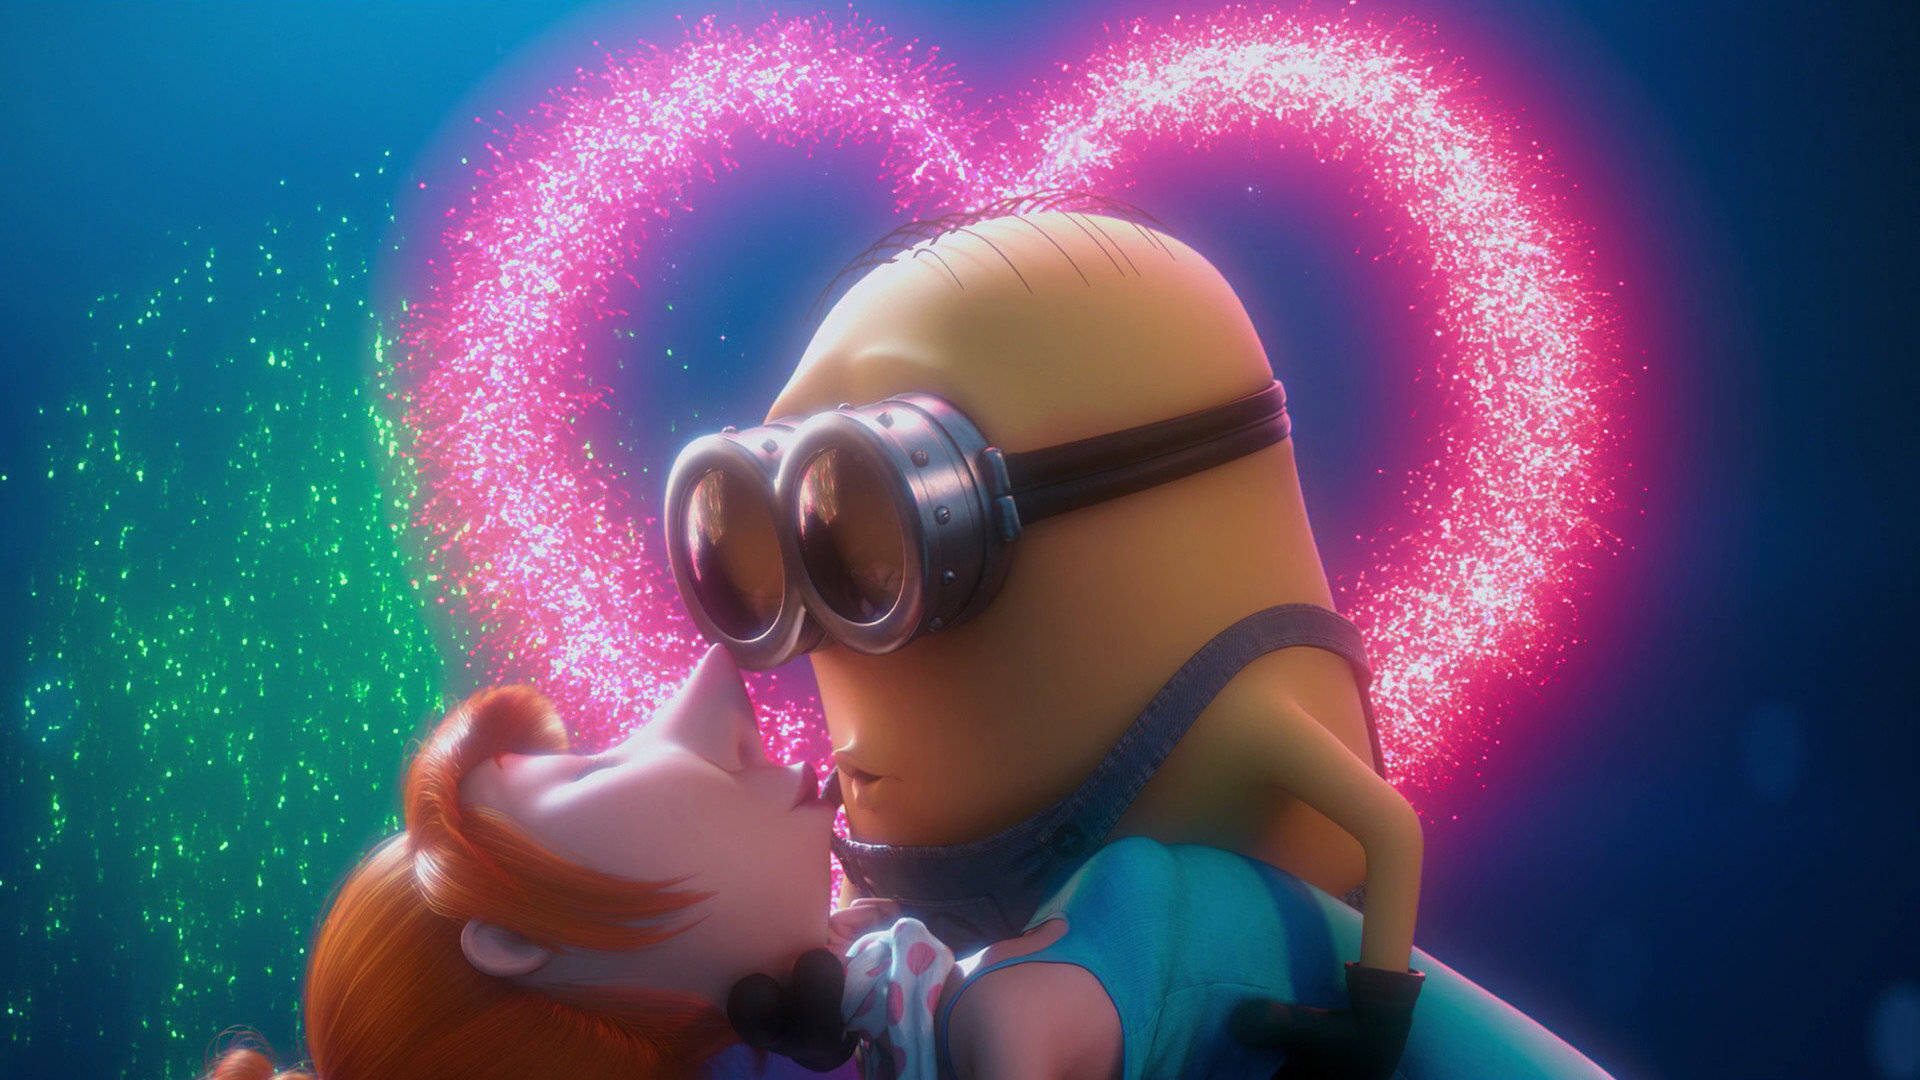 Dave Kissing Lucy Despicable Me 2 Wallpaper